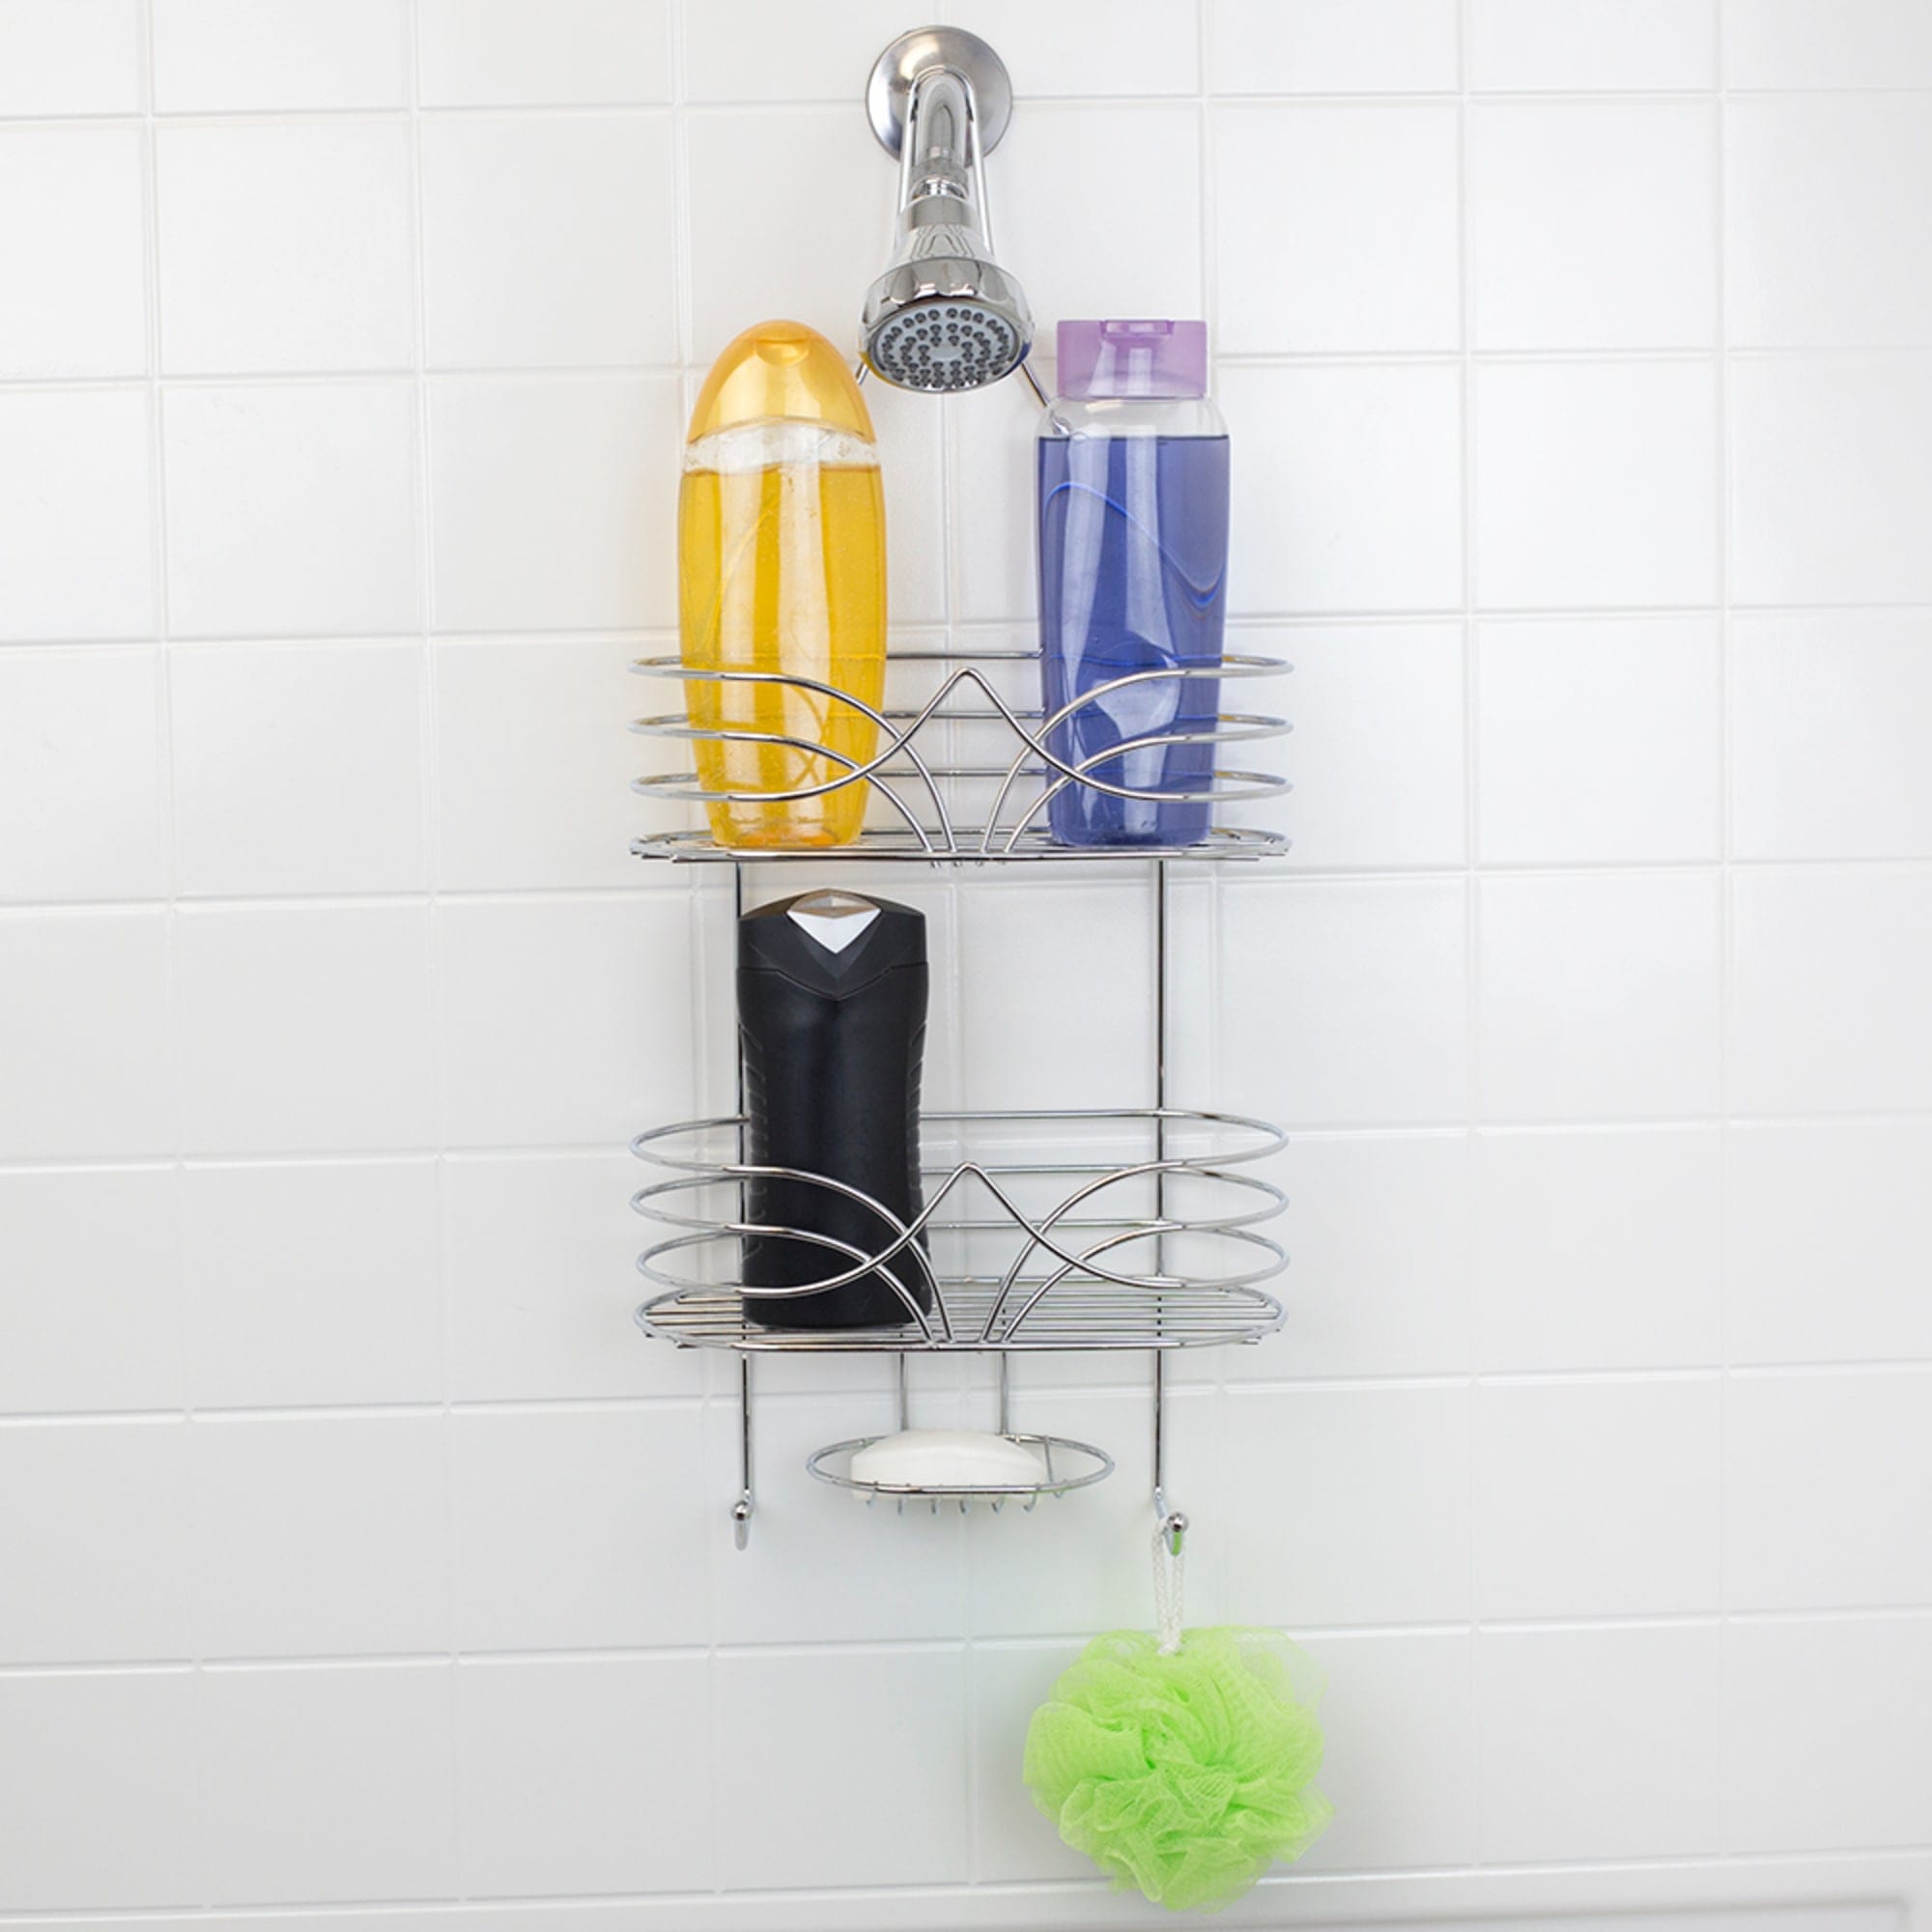 Home Basics Marquee Shower Caddy, Chrome $10 EACH, CASE PACK OF 12